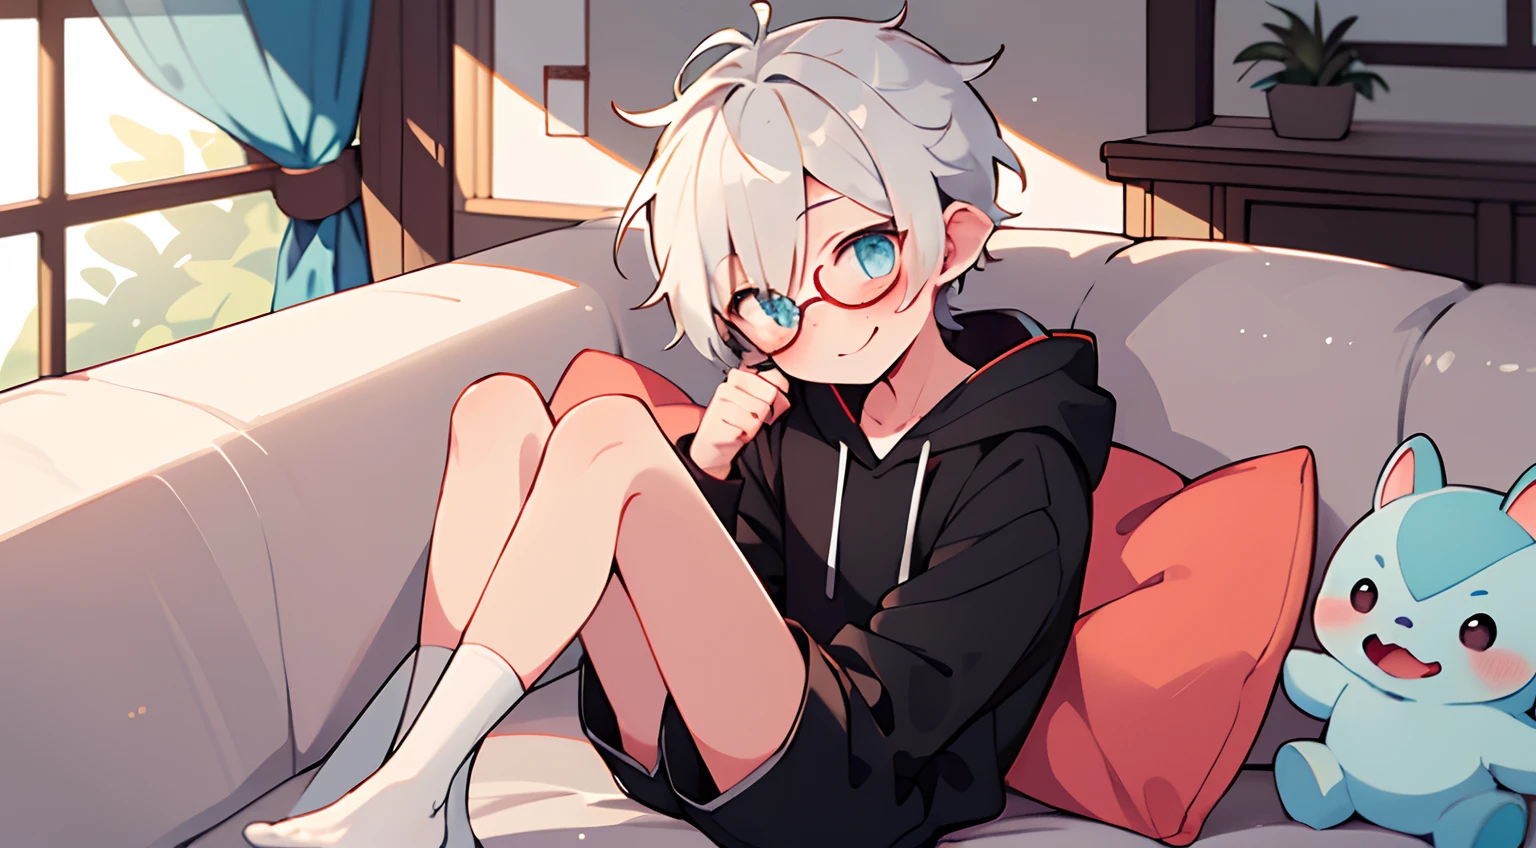 ((masterpiece)),(((best quality))), (high-quality, breathtaking),(expressive eyes, perfect face), 1boy, solo, male, short, young, small boy, short white hair, aquamarine eyes, goblin ears, smiling, wearing round glasses, blushing, oversize black hoodie, white short shorts, white socks, holding stuff animal, cute,sitting in the couch